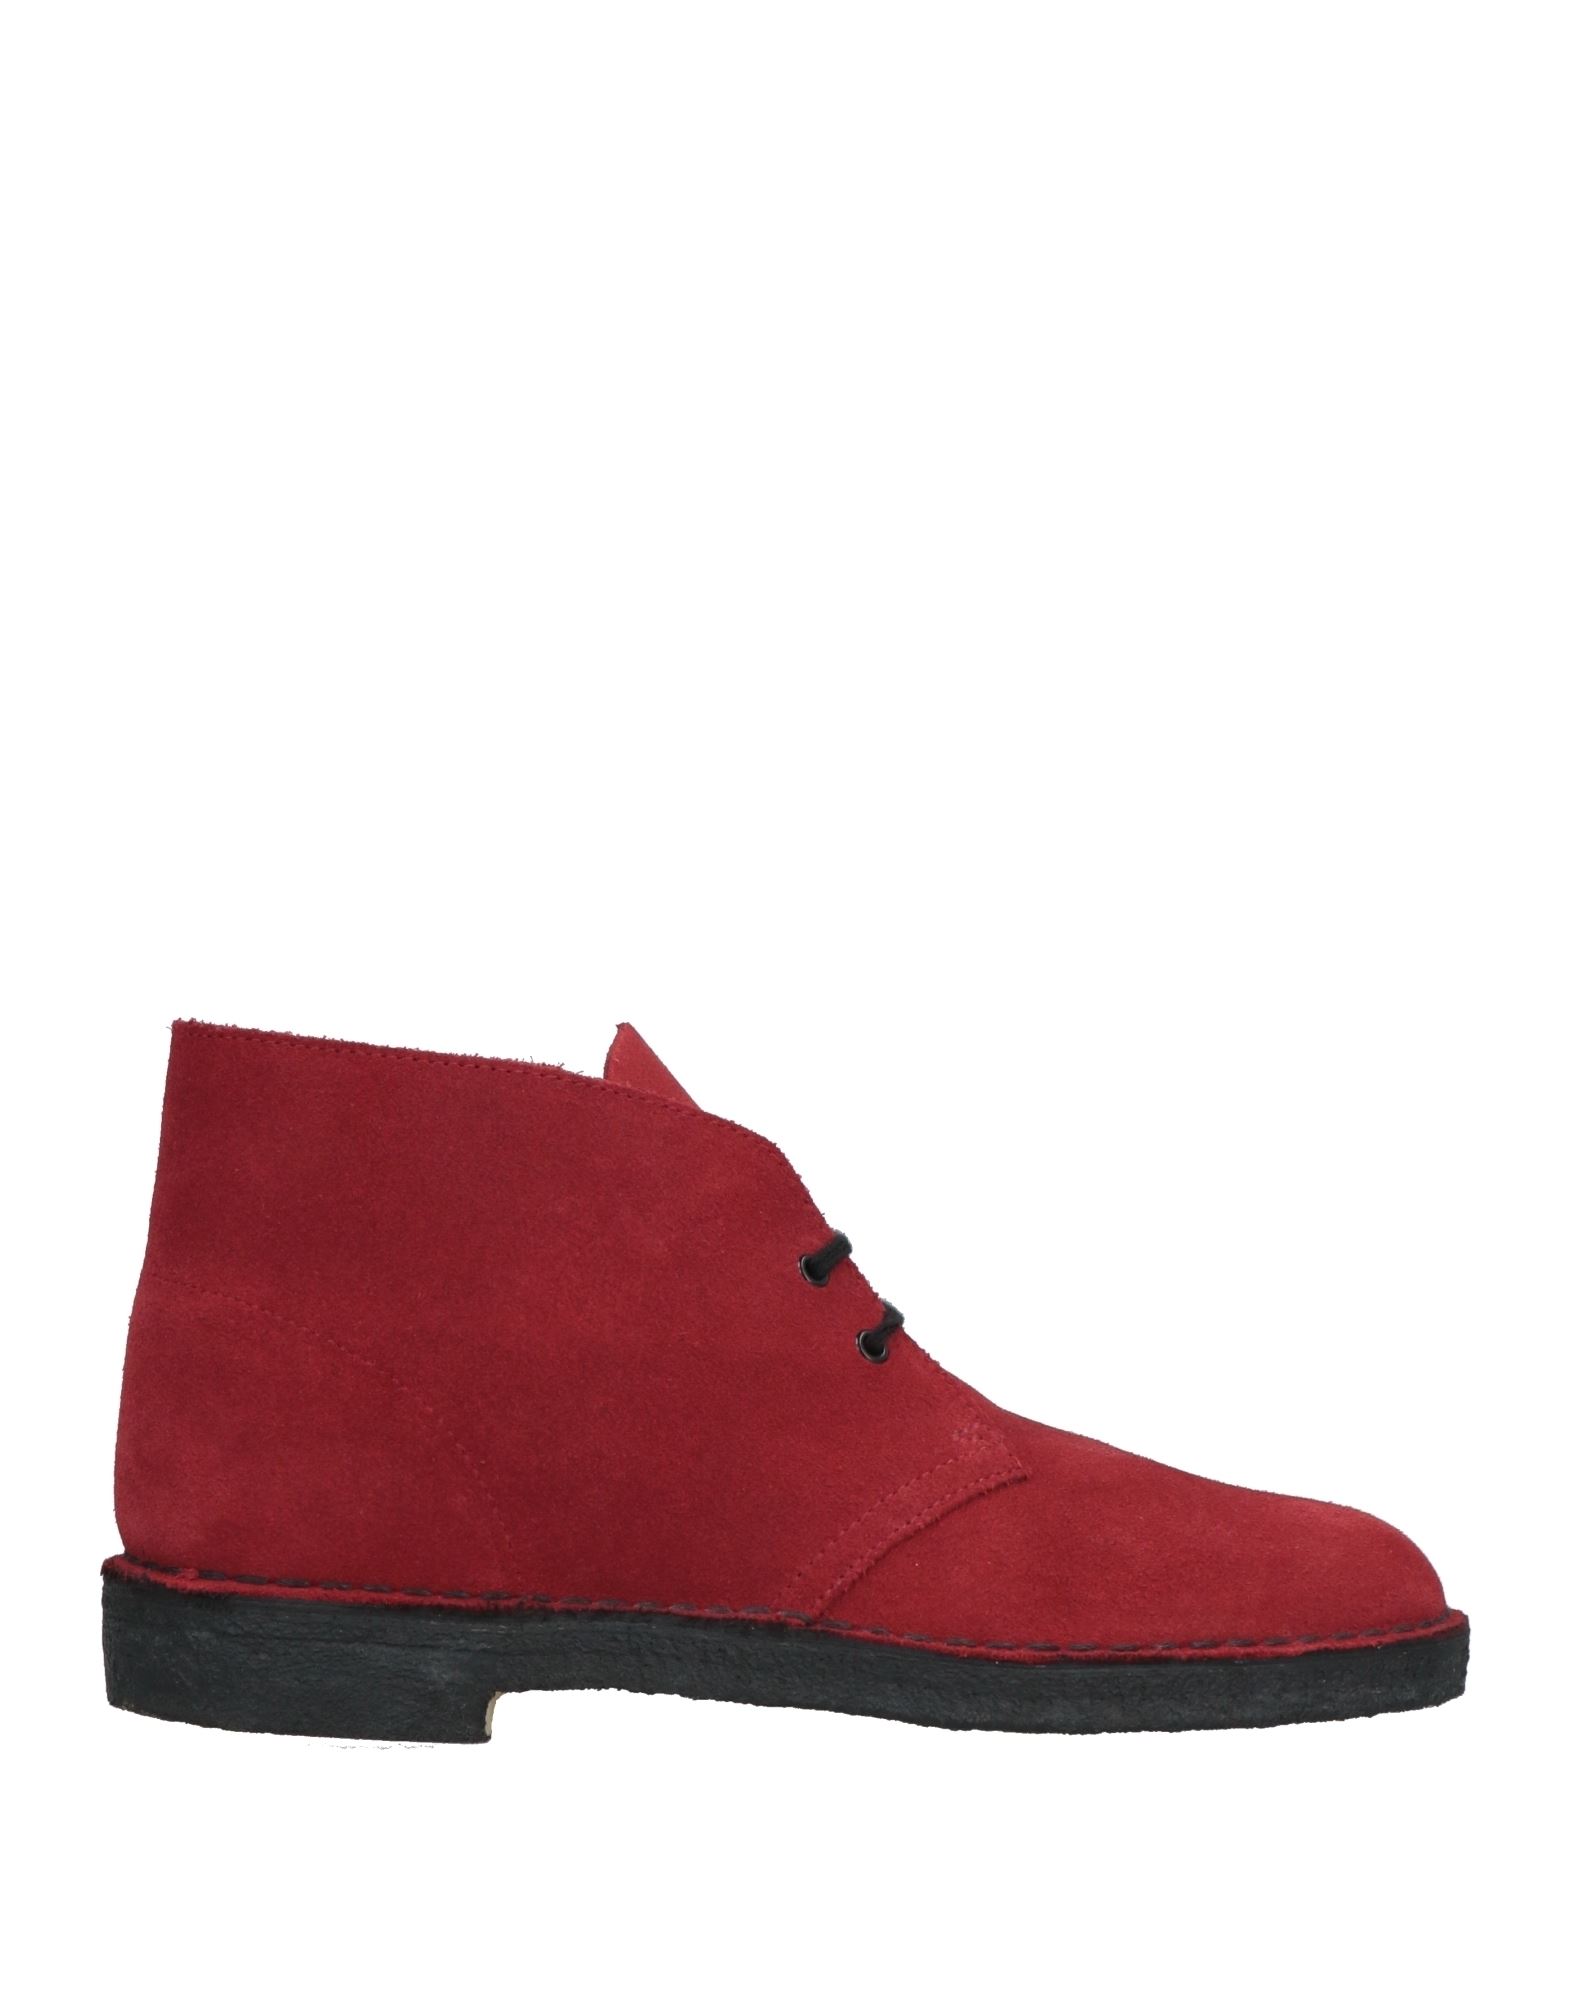 Clarks Originals Ankle Boots In Red